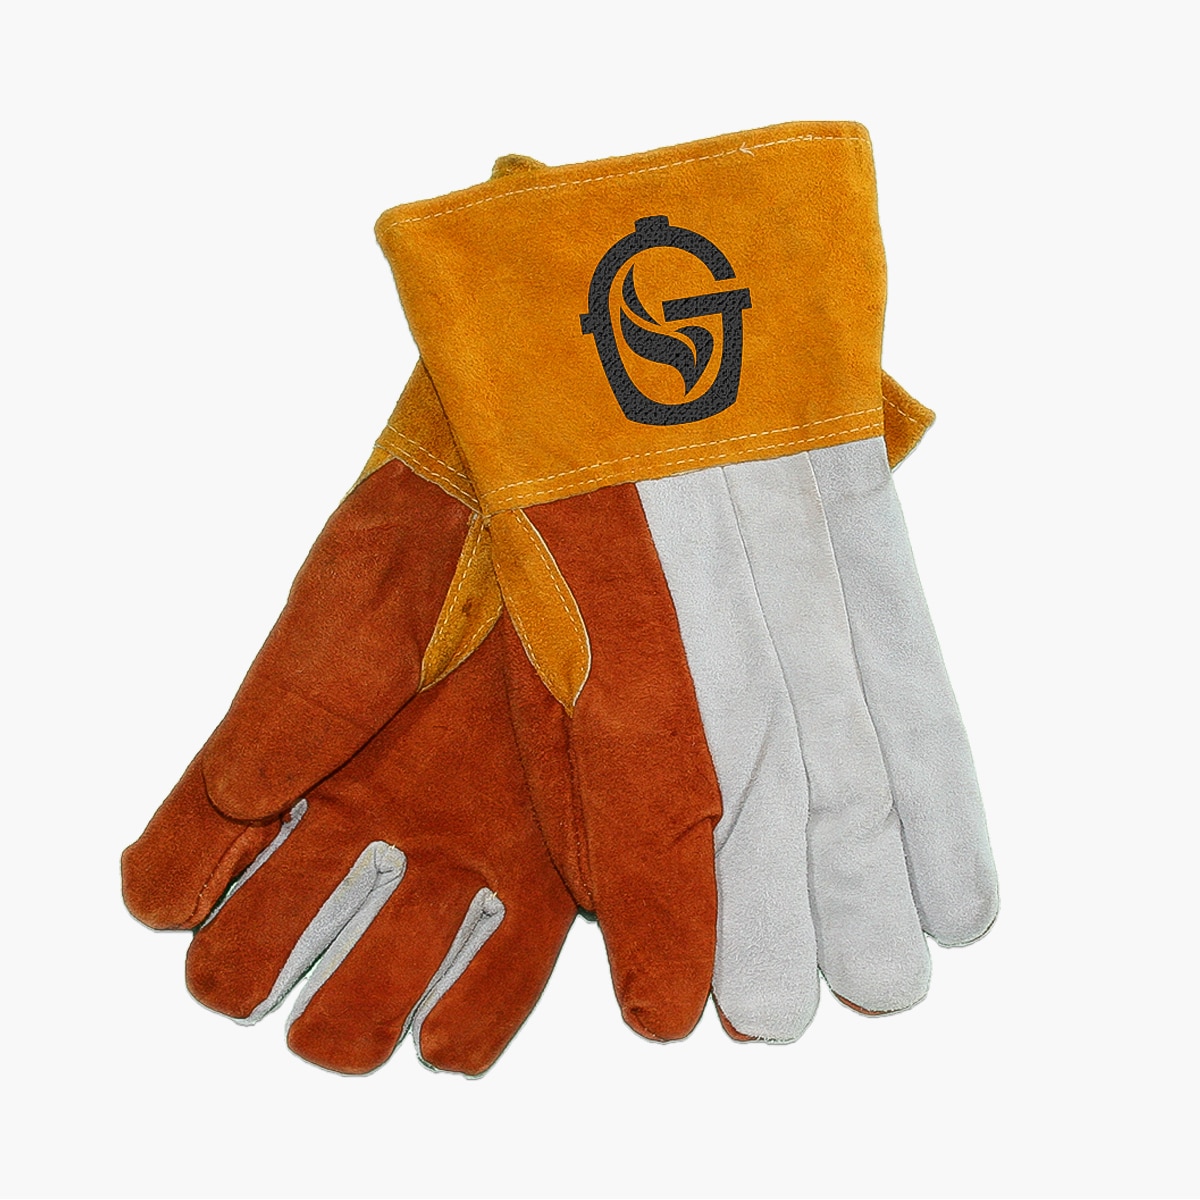 Goldens' Cast Iron Foundry Heat-Resistant Gloves for 20.5" and 14" Kamado Grills